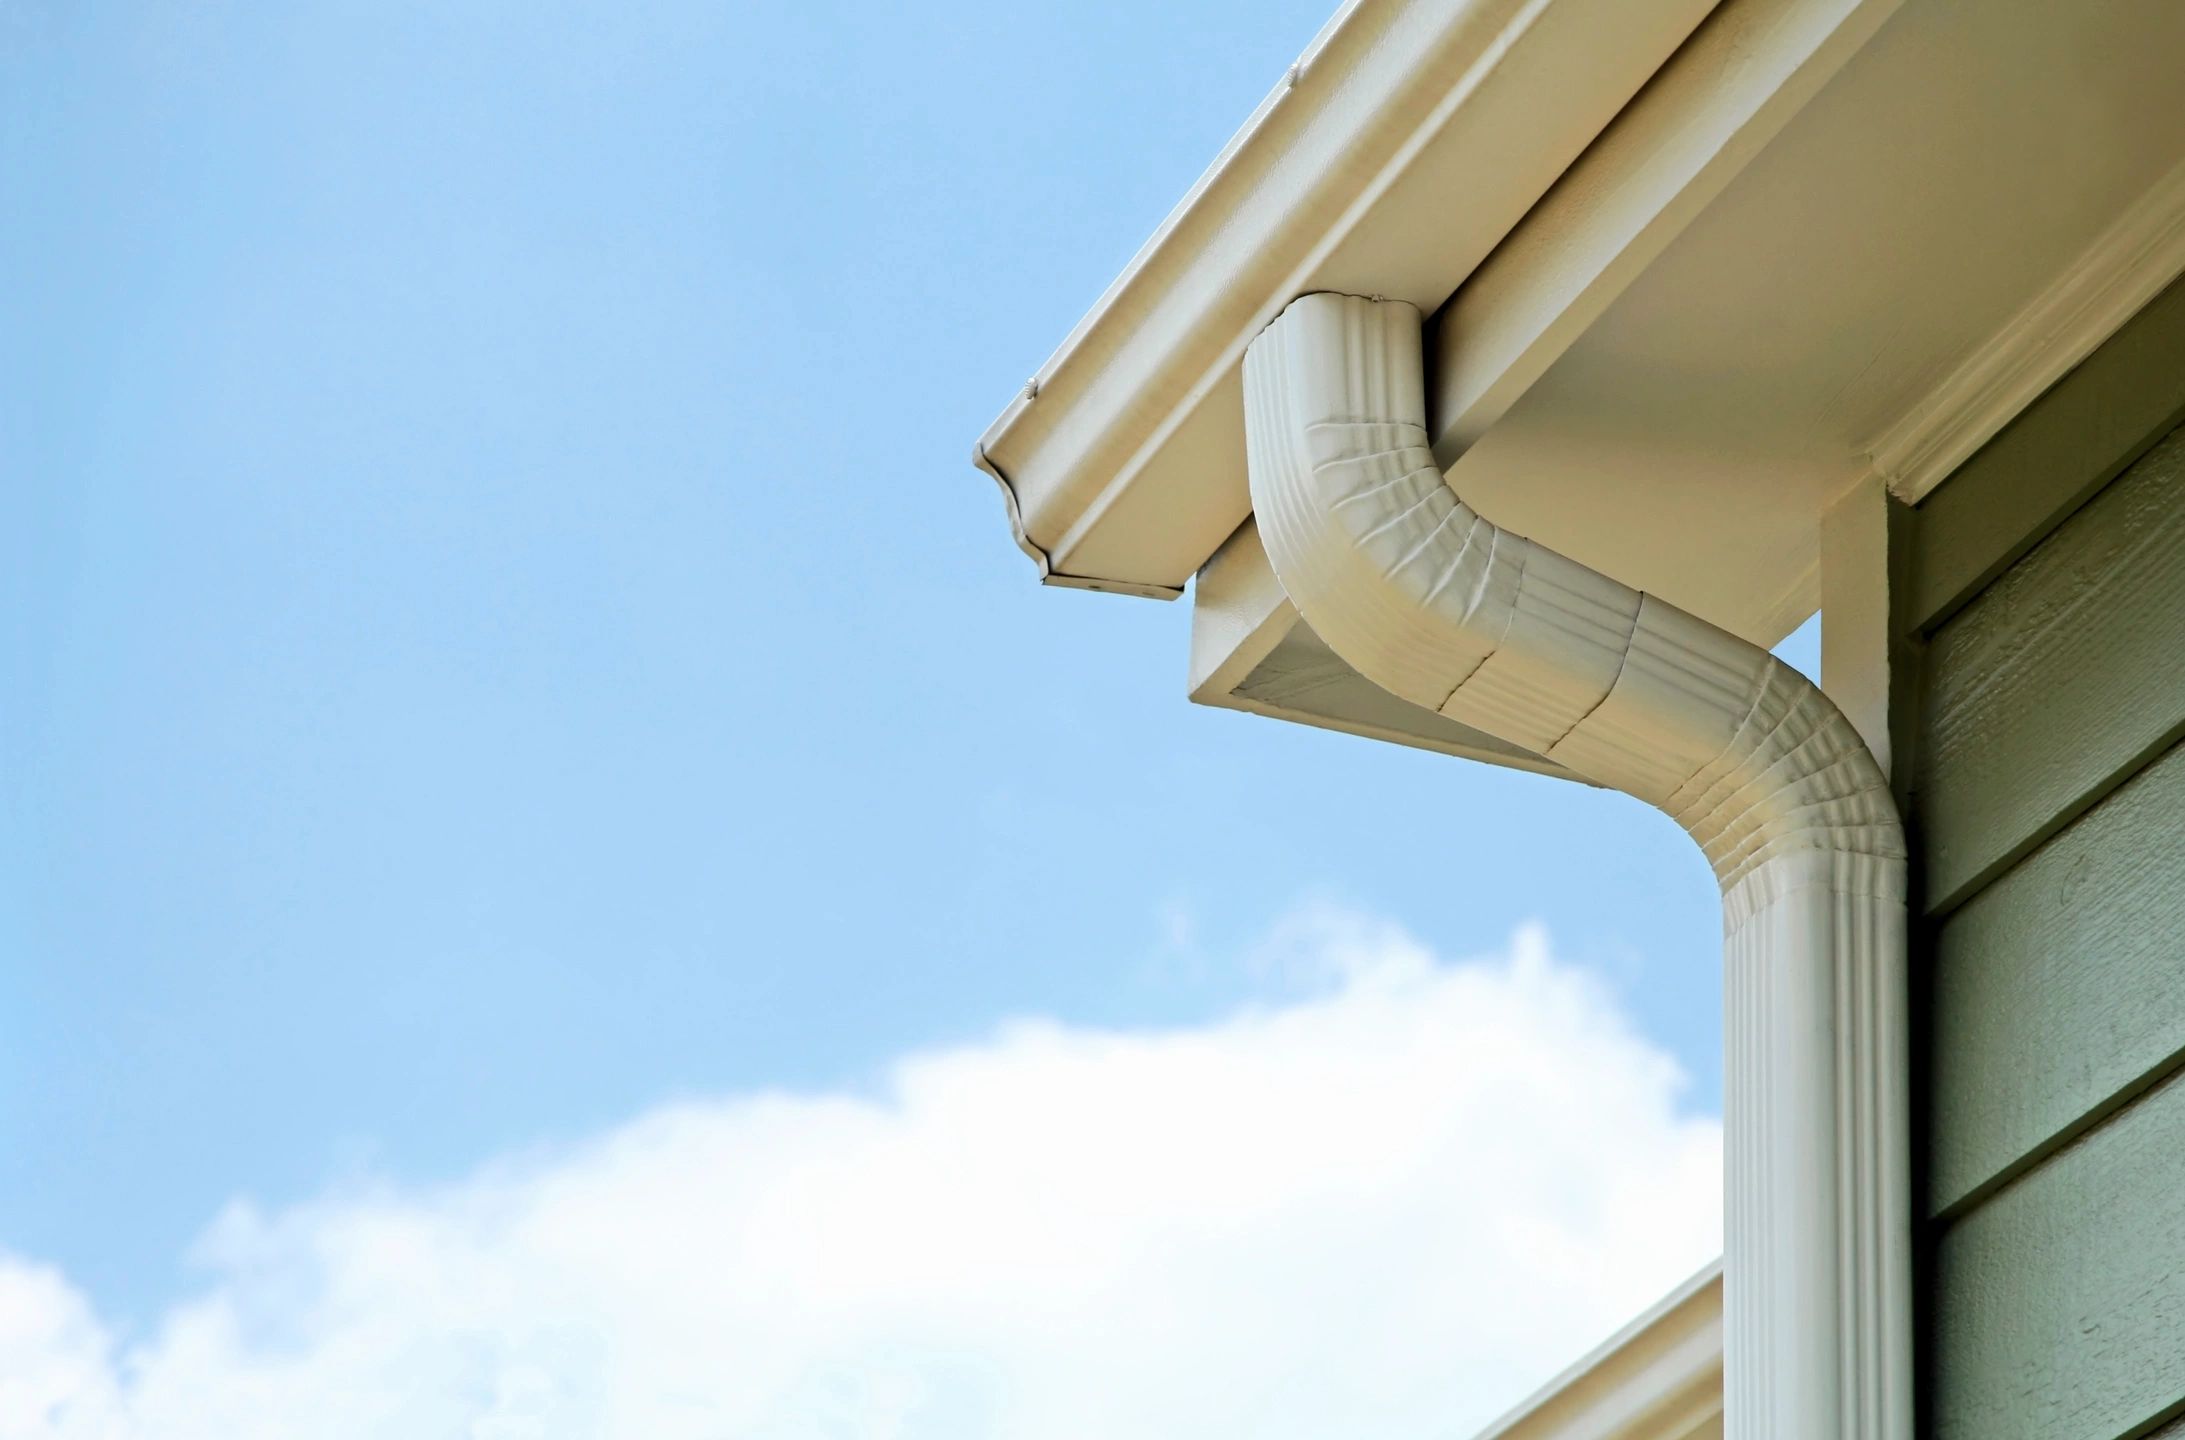 Make your gutters work the way they should